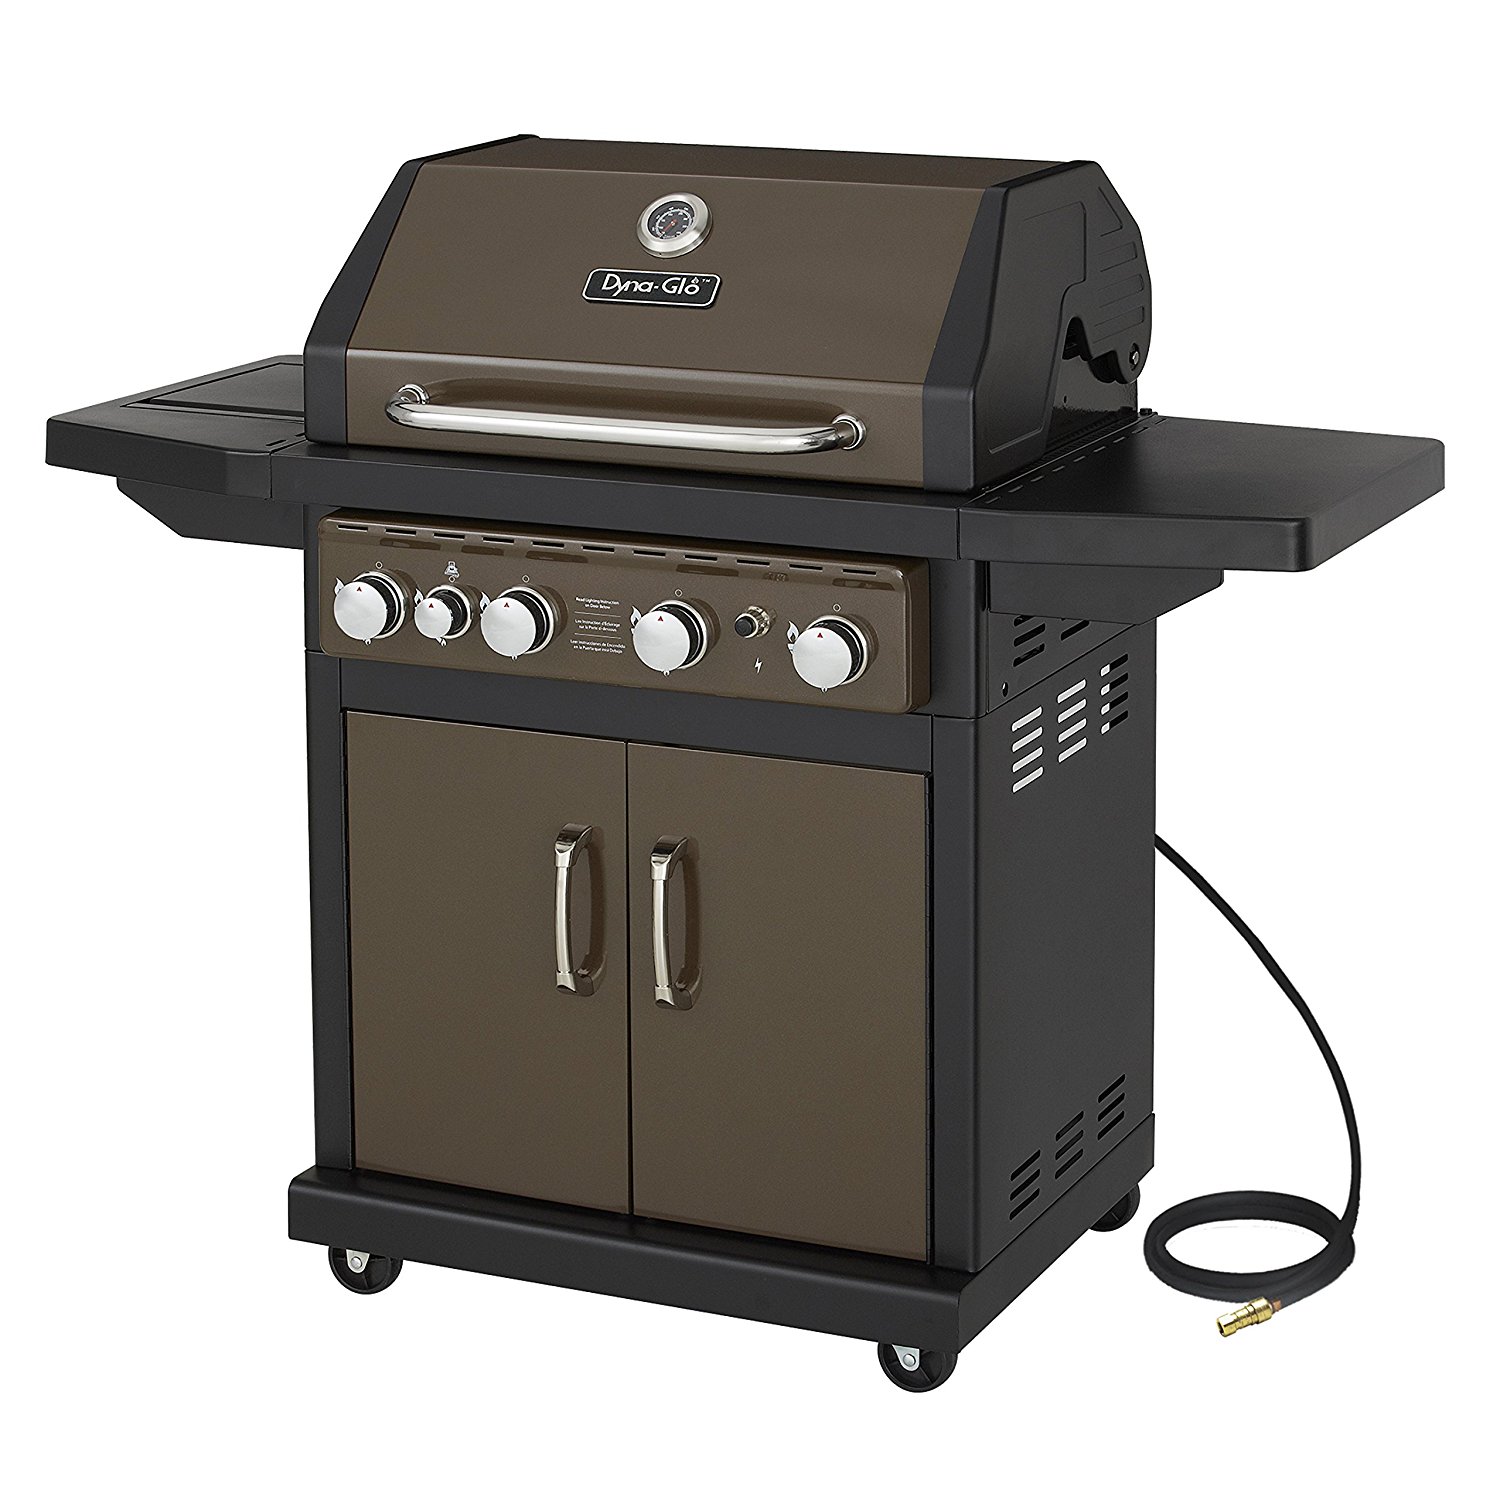 BBQ Pits On Sale - Buy Electric, Charcoal and Propane Grills At Best Prices